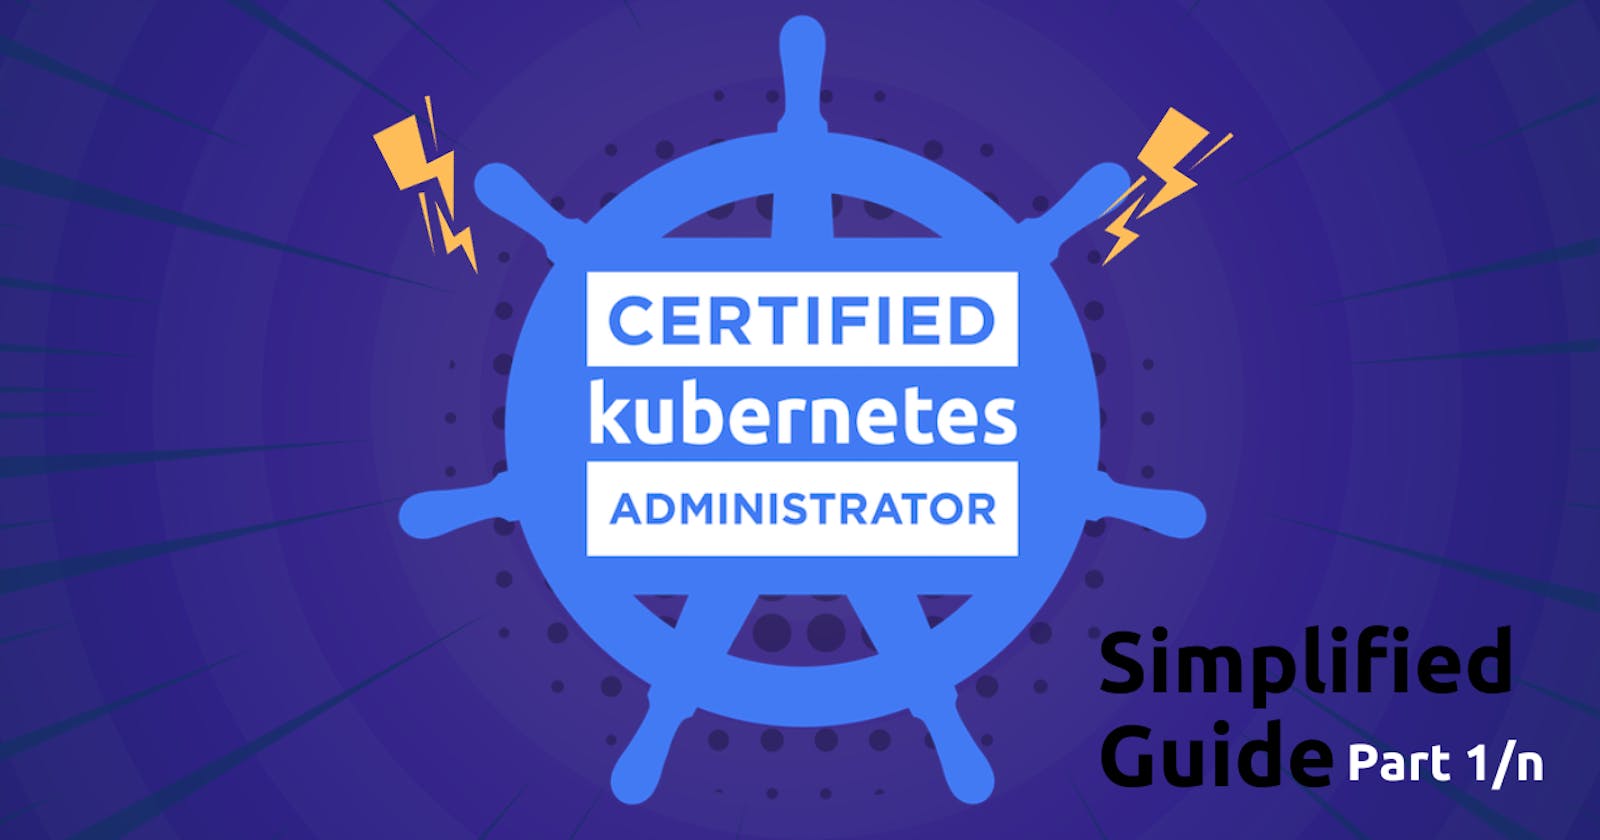 Certified Kubernetes Administrator CKA one stop simplified guide! - Part 1/10